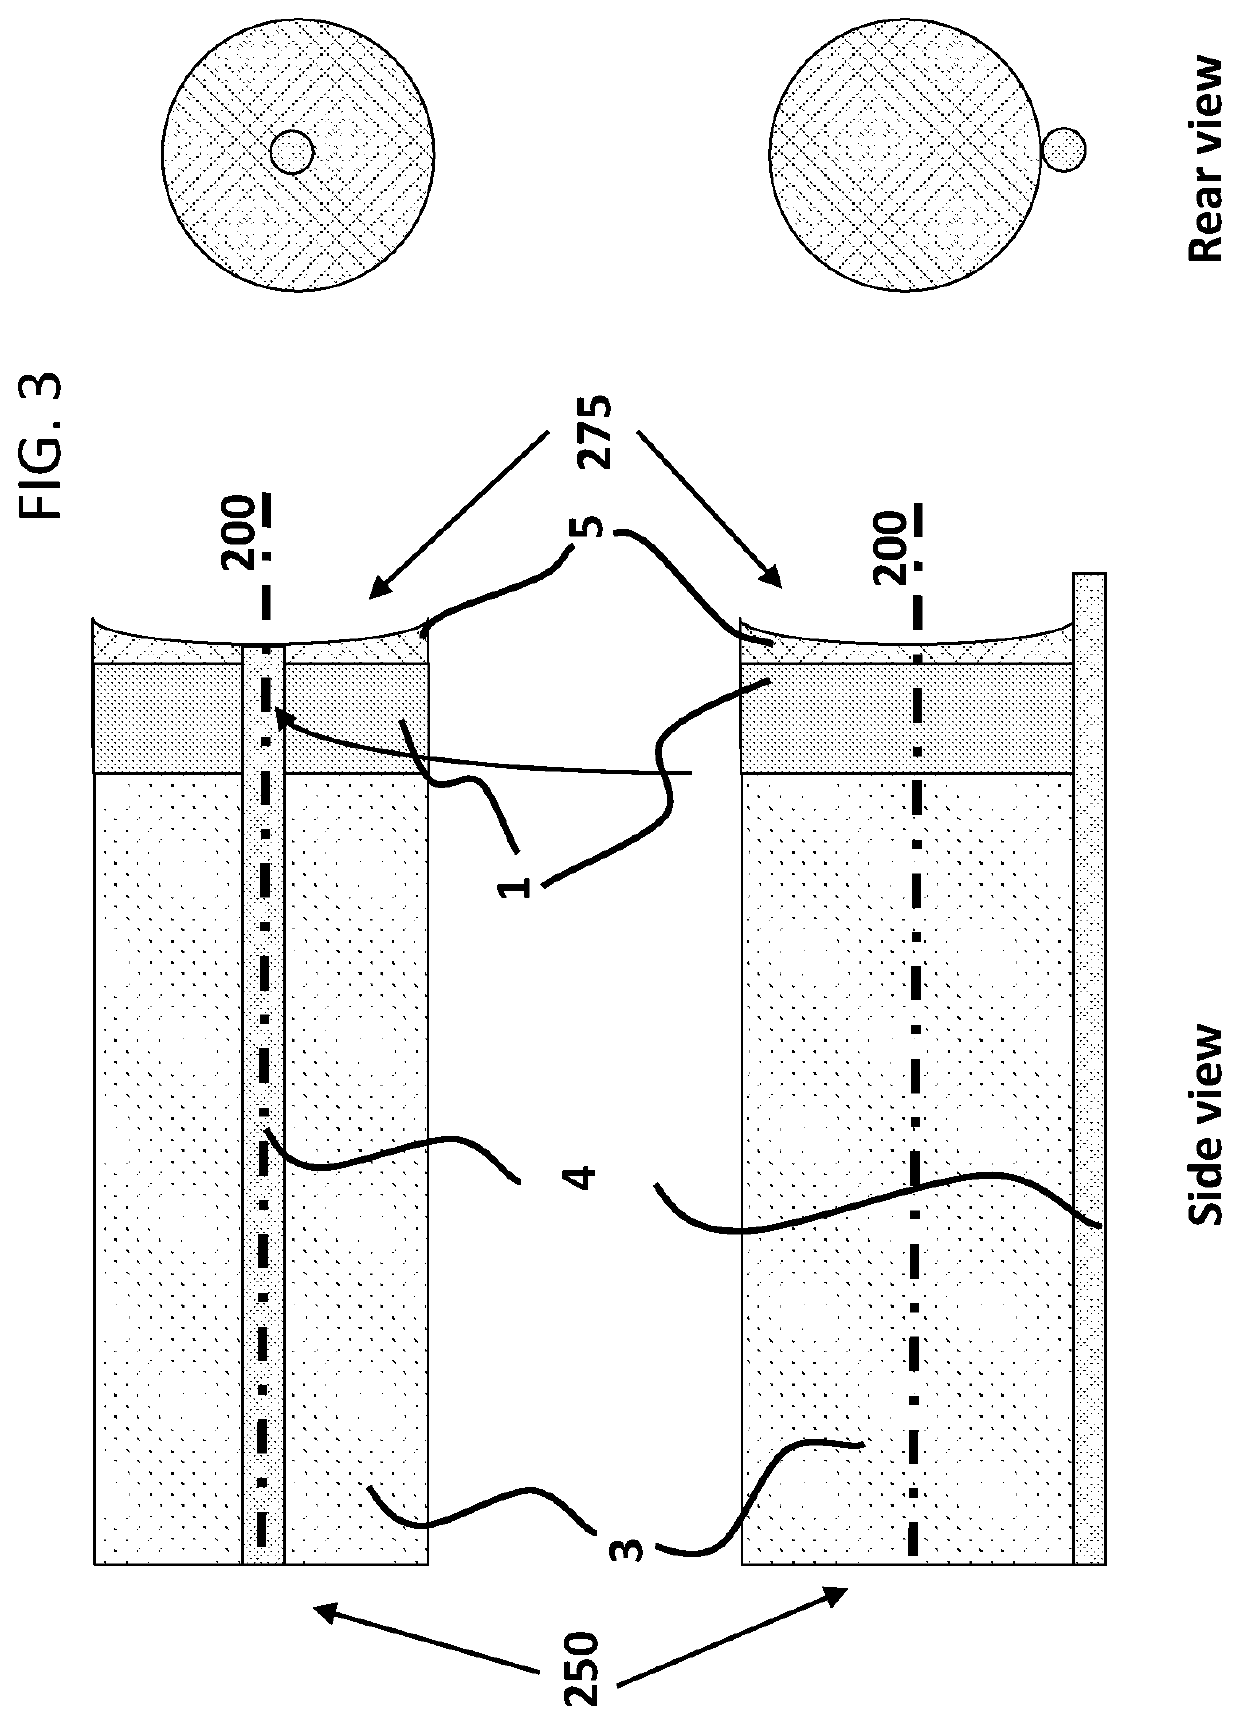 Ultrasound transducer and array for intravascular thrombolysis